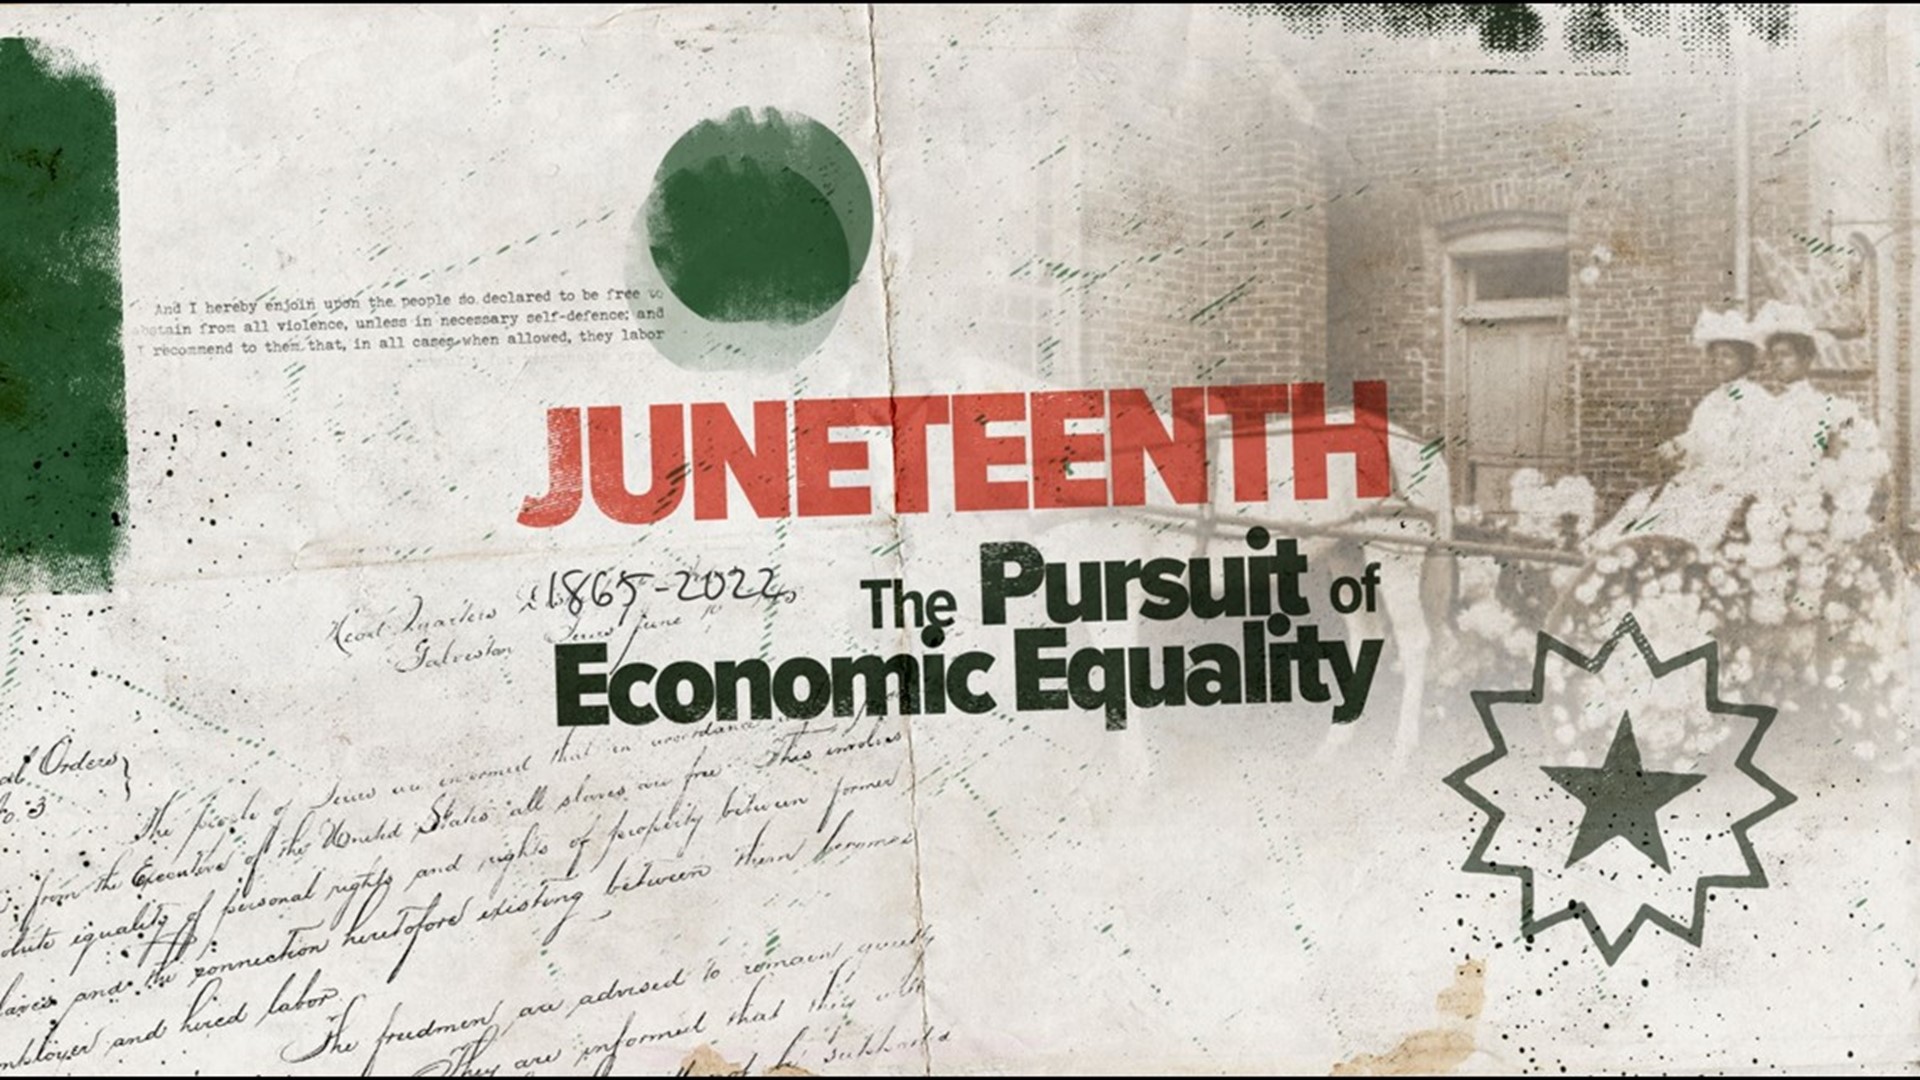 Len Cannon and Mia Gradney highlight the lasting financial impact of Juneteenth on Black Americans and the challenges that remain.